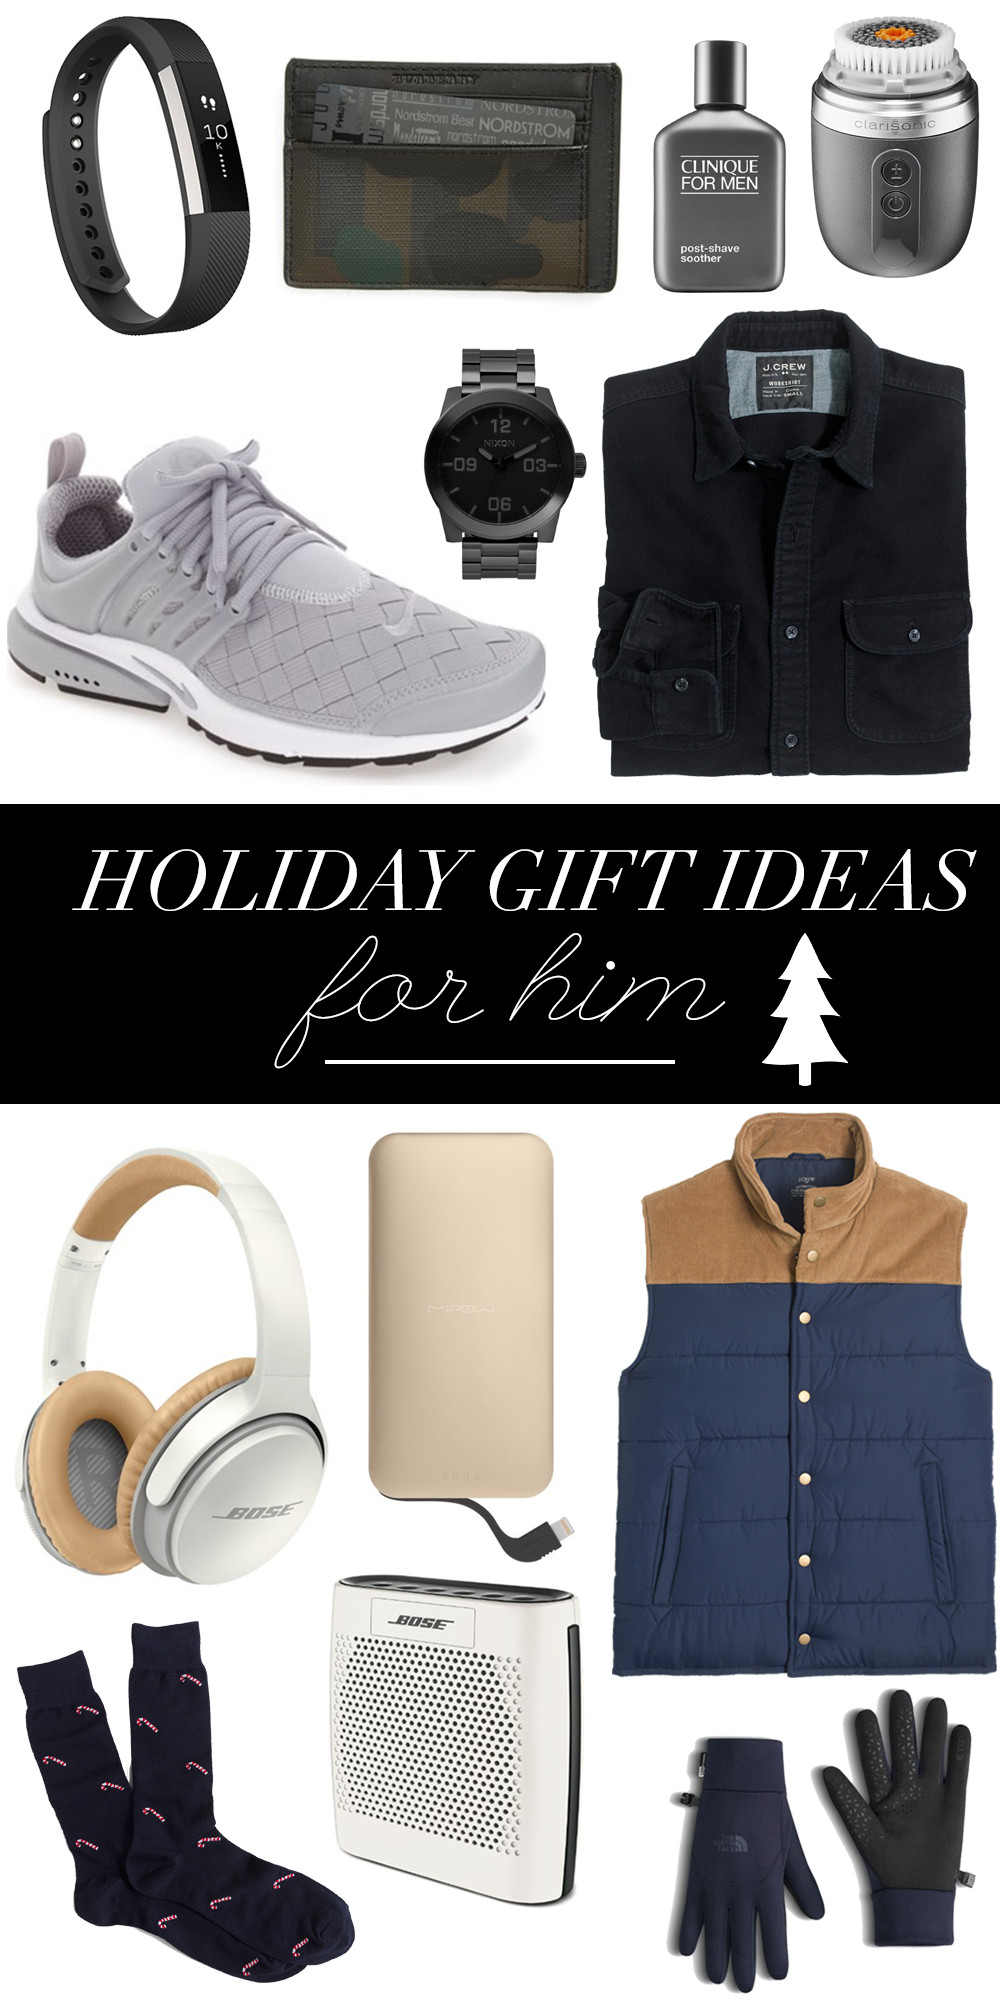 Holiday Gift Ideas For Him
 Holiday Gift Ideas For Him Money Can Buy Lipstick